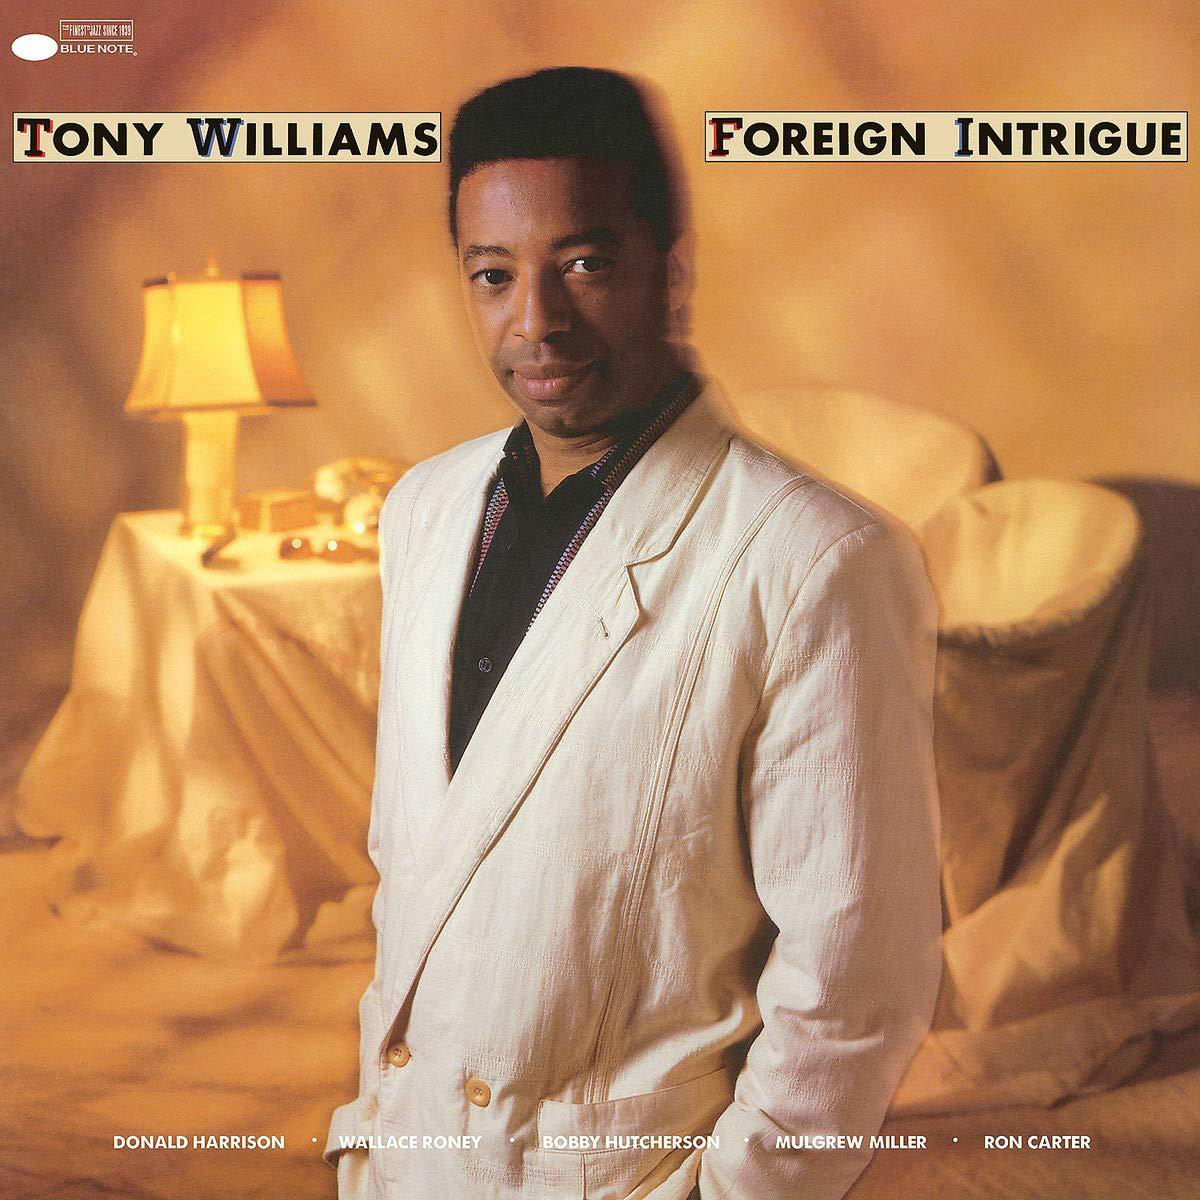 INTRIGUE FOREIGN Williams Tony - (Vinyl) -